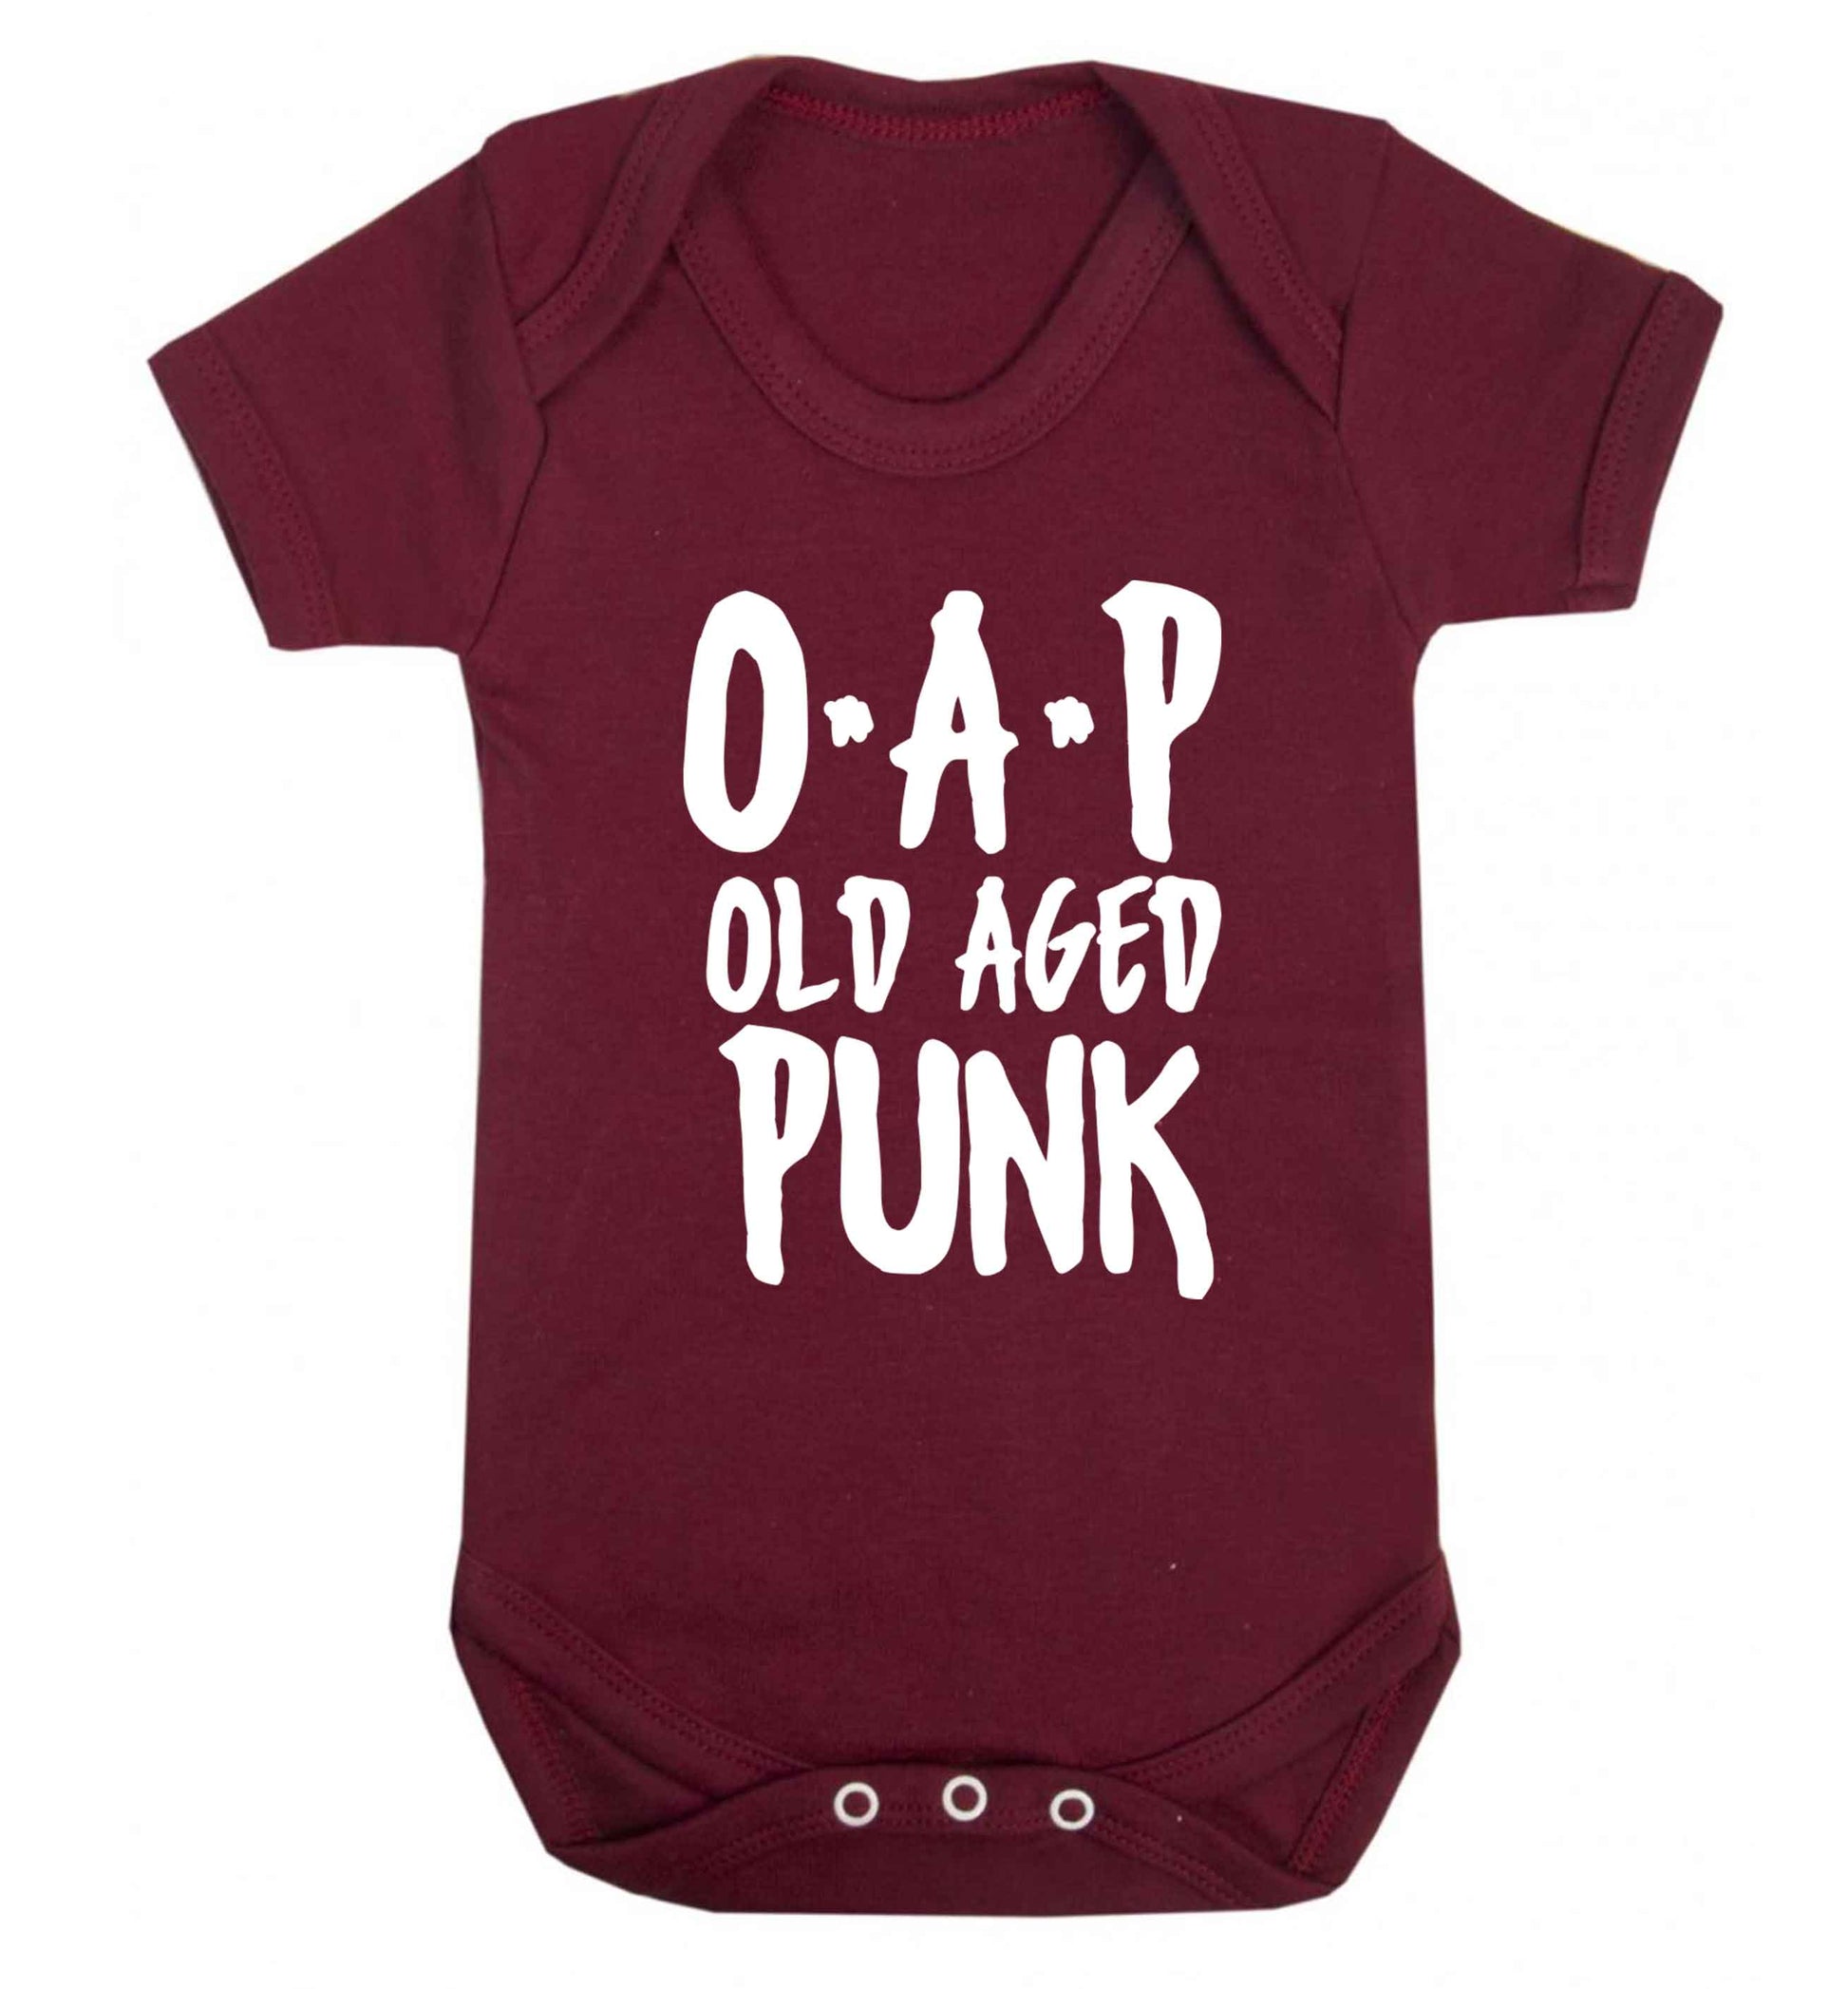 O.A.P Old Age Punk Baby Vest maroon 18-24 months